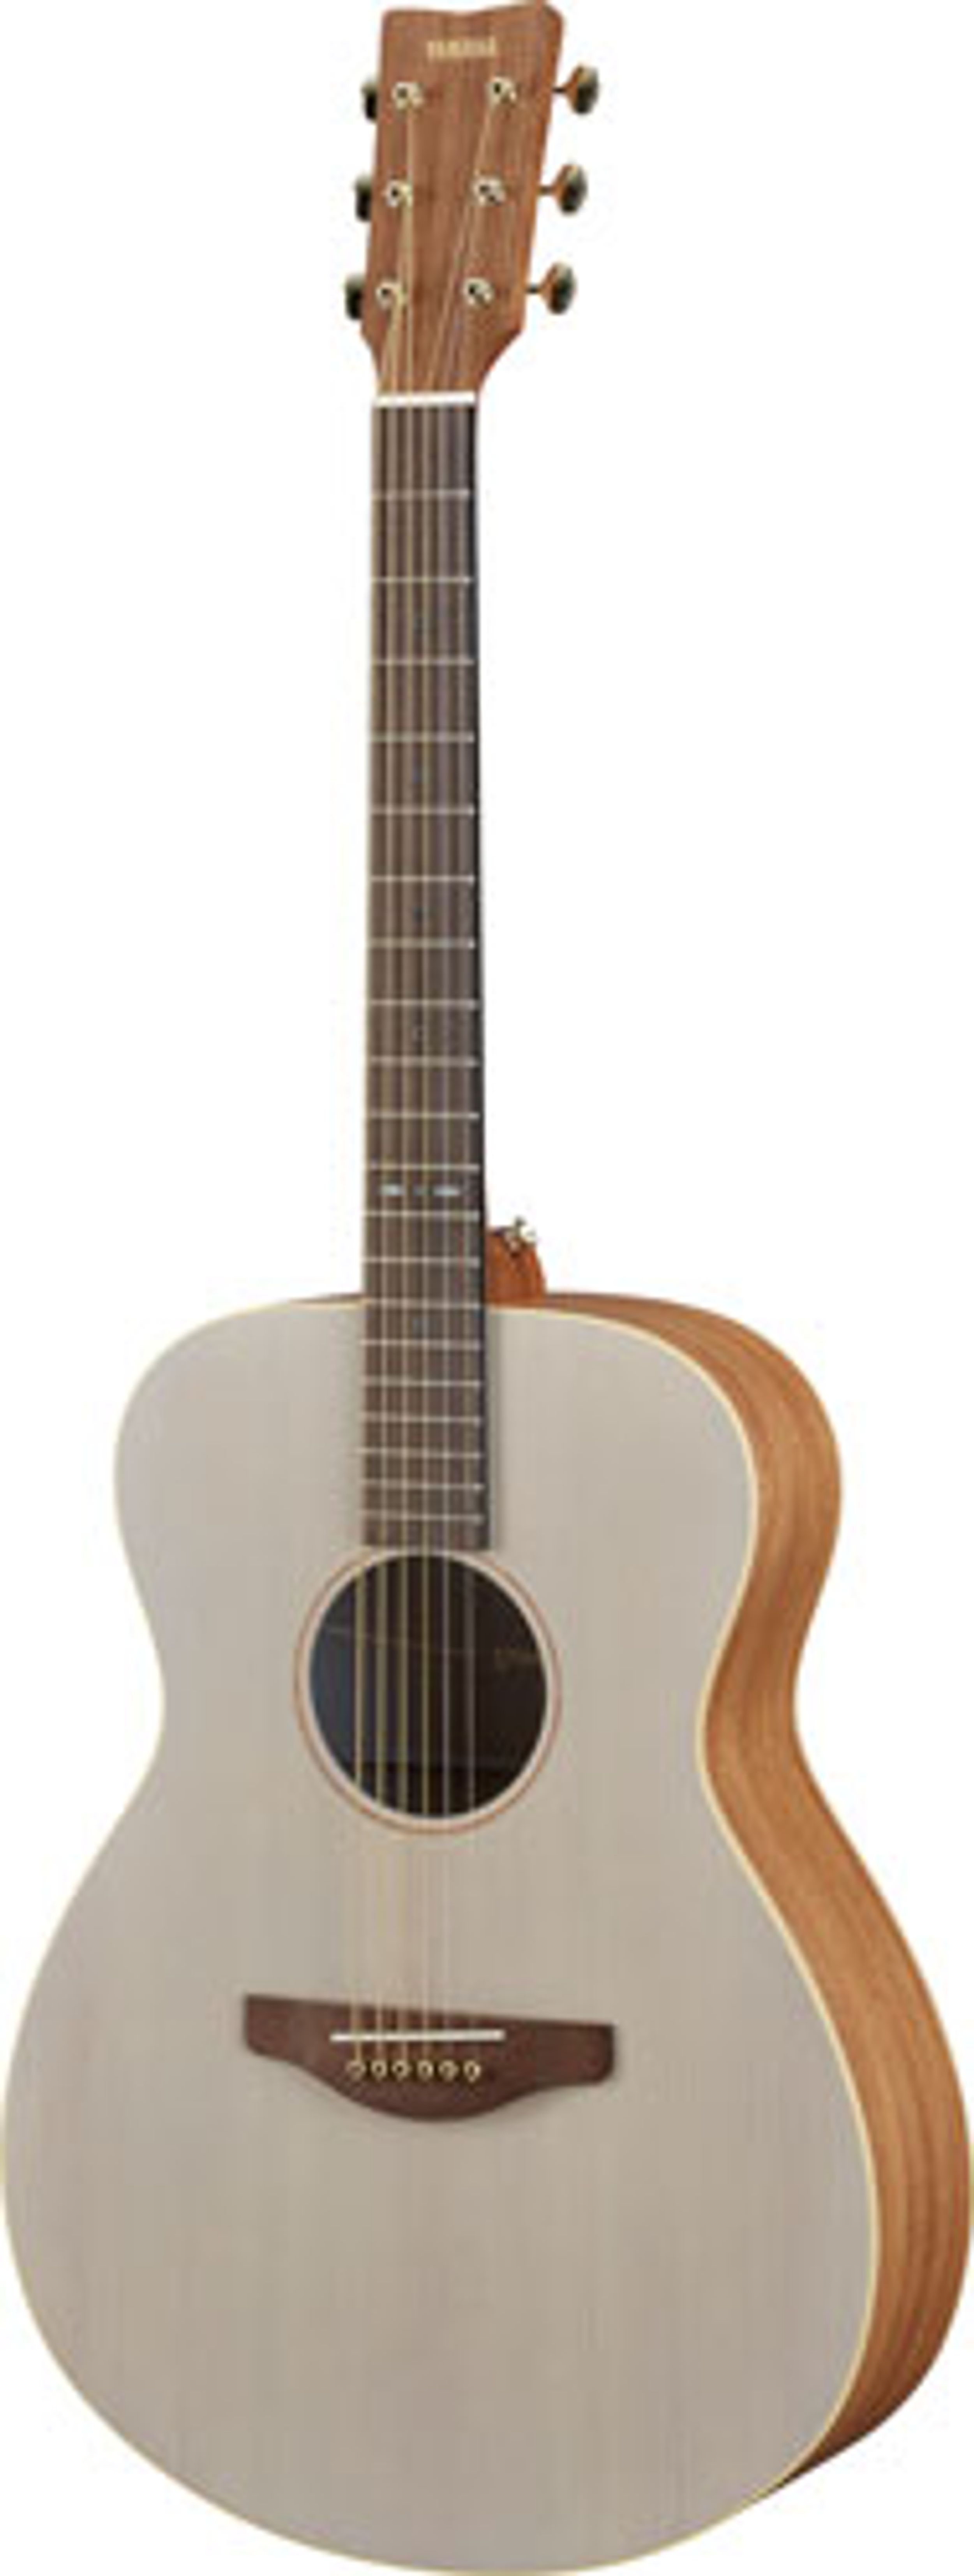 Yamaha Releases Storia Line of Acoustic Guitars